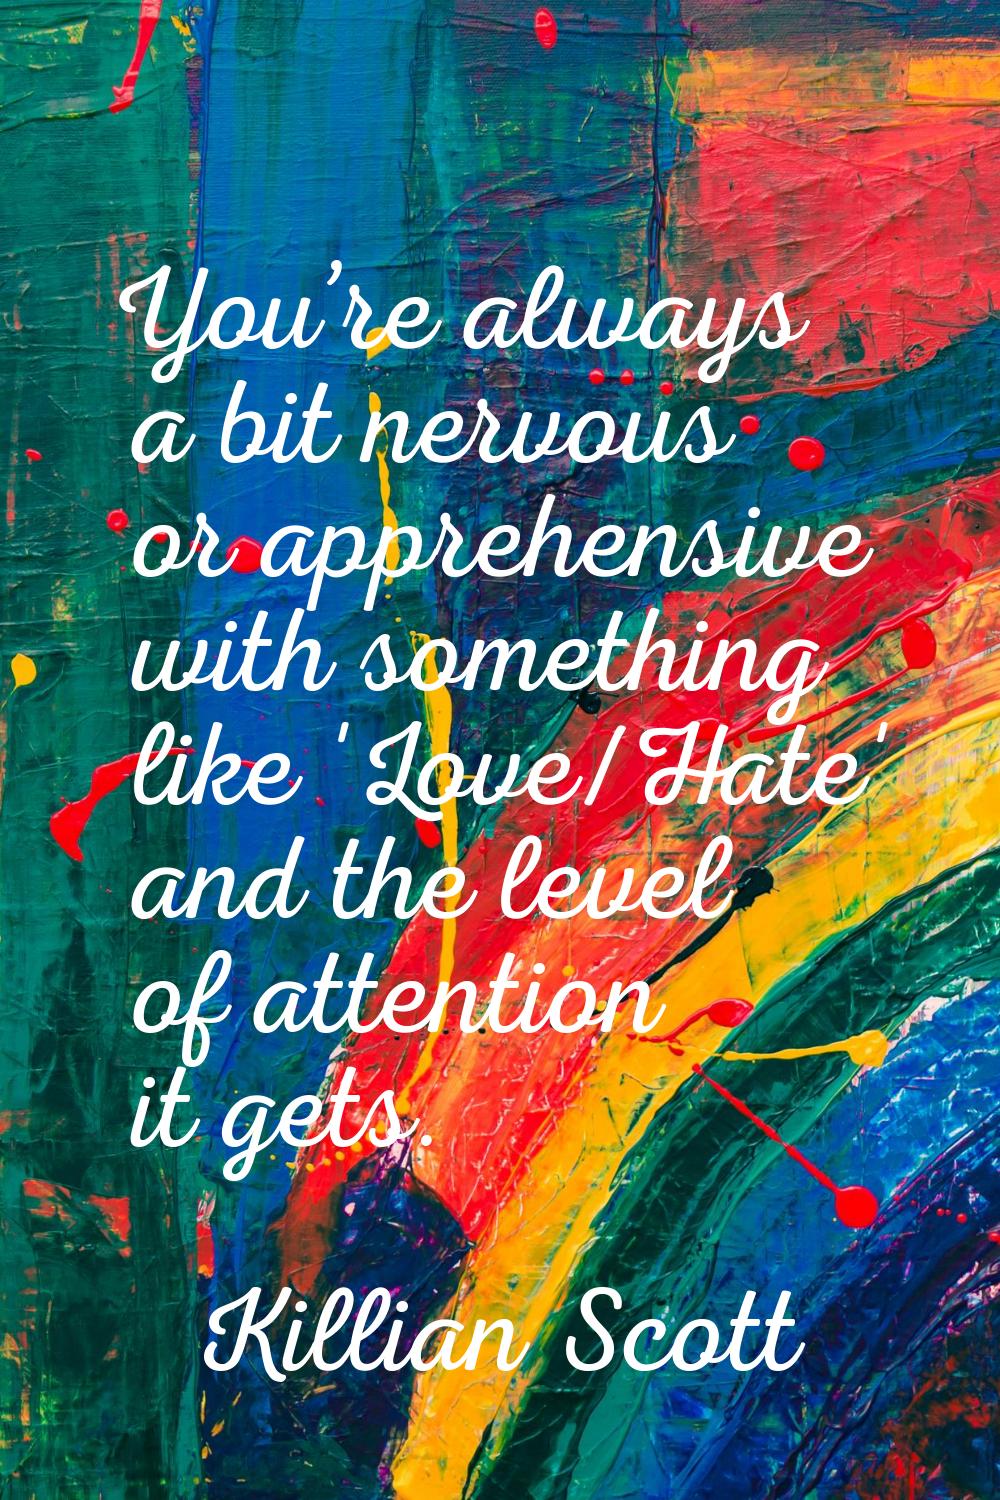 You’re always a bit nervous or apprehensive with something like 'Love/Hate' and the level of attent